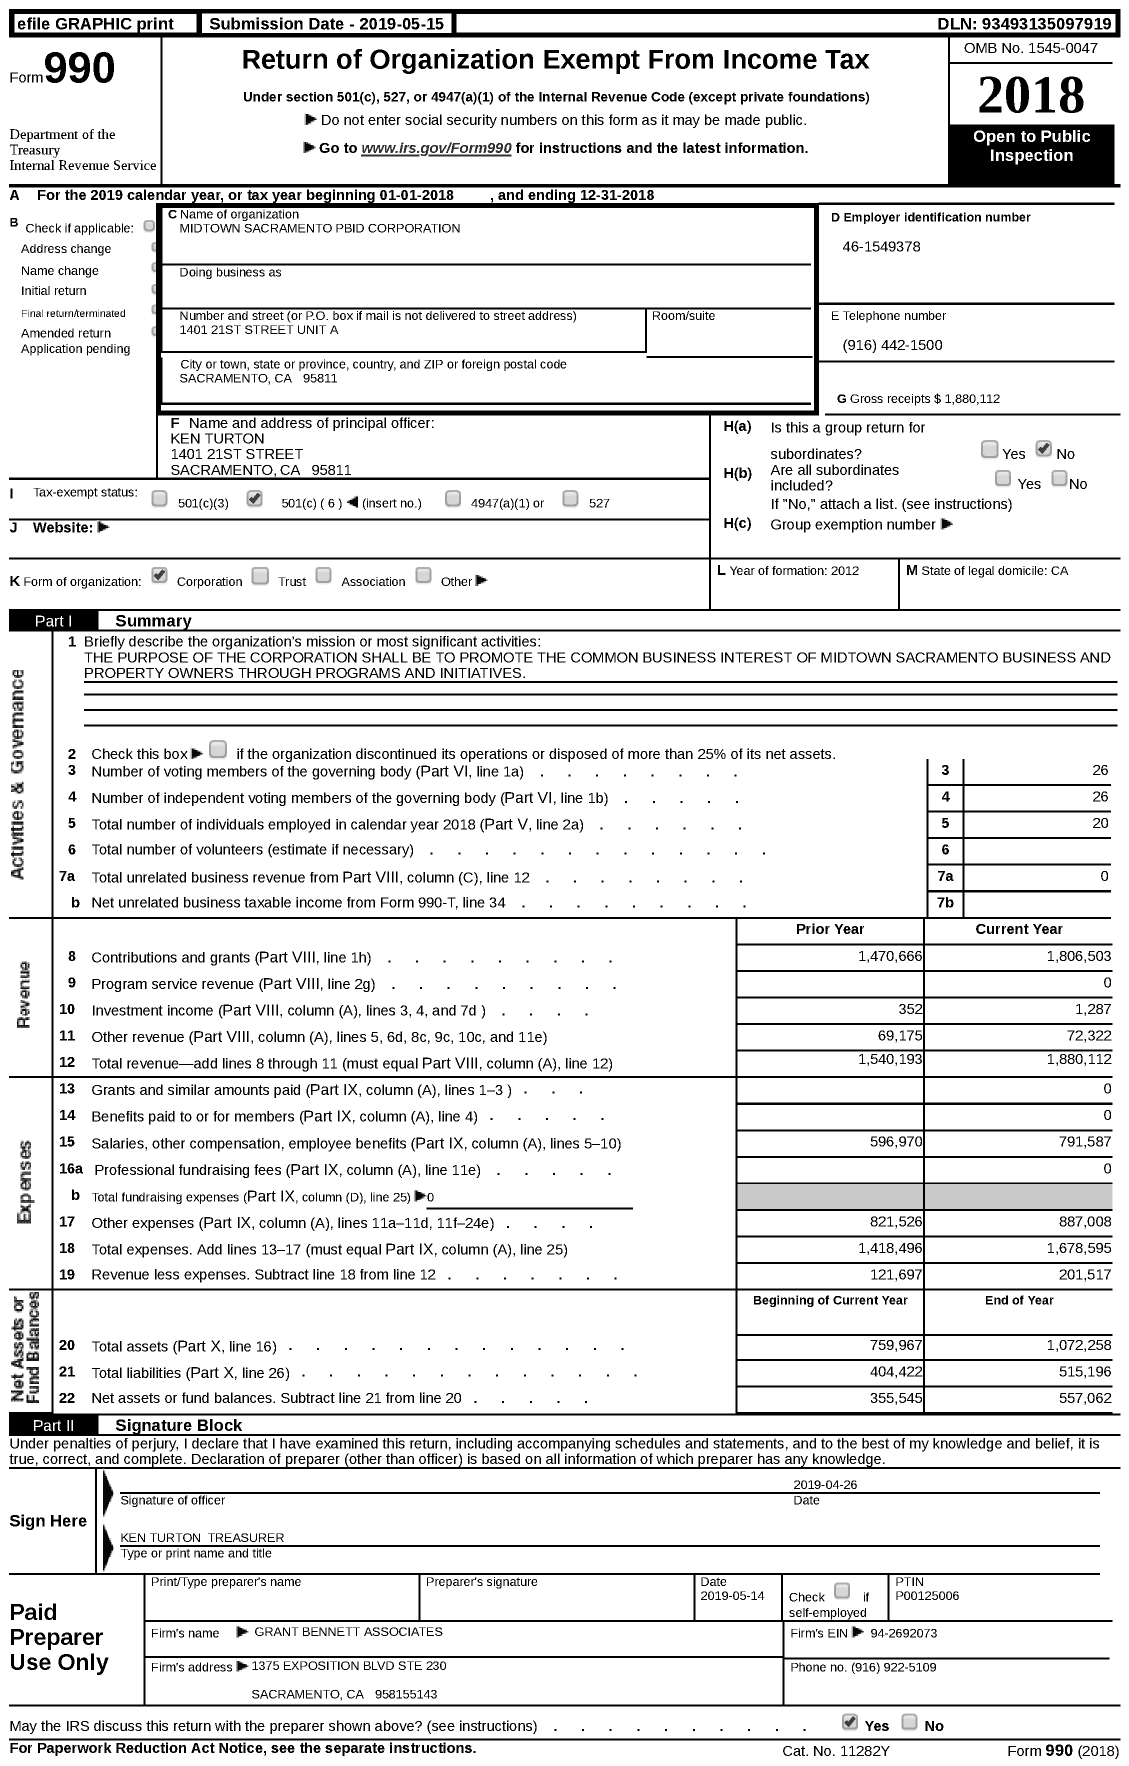 Image of first page of 2018 Form 990 for Midtown Sacramento PBID Corporation